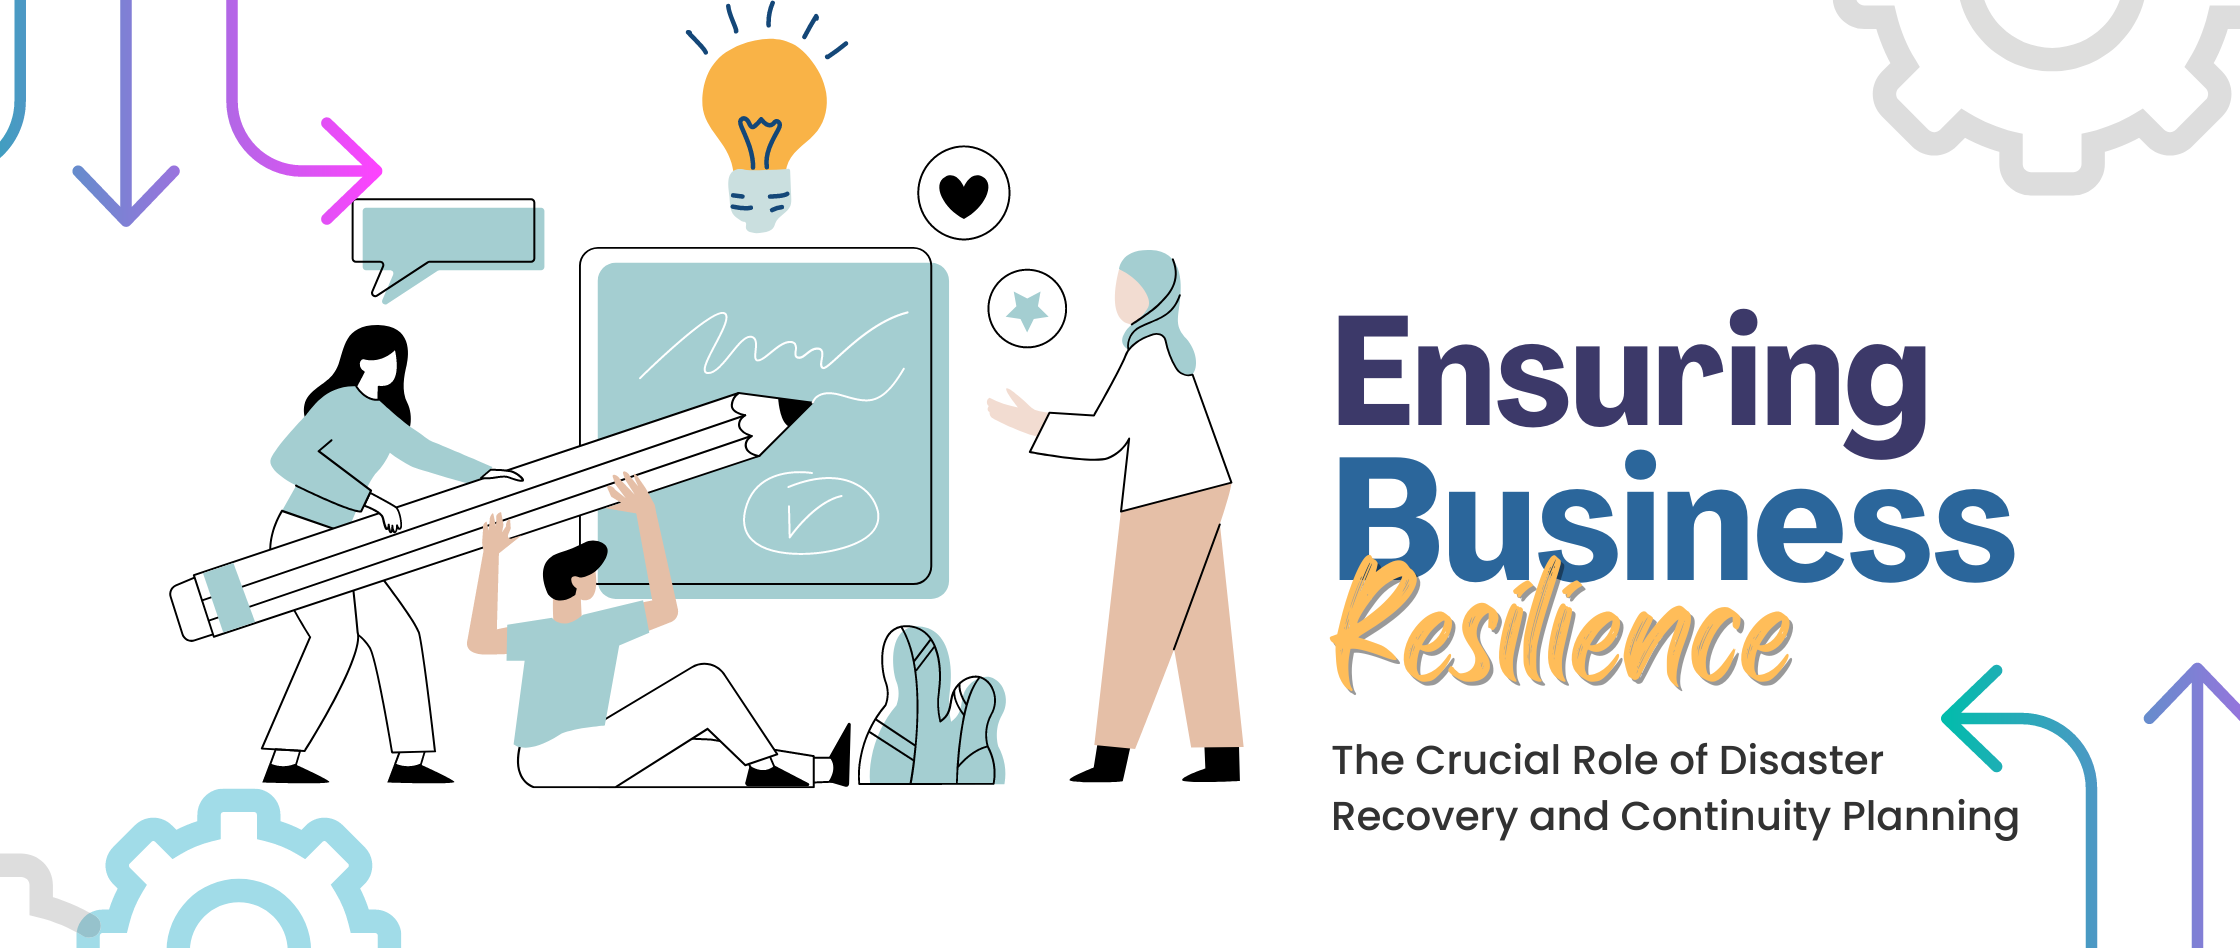 Ensuring Business Resilience: The Crucial Role of Disaster Recovery and Continuity Planning